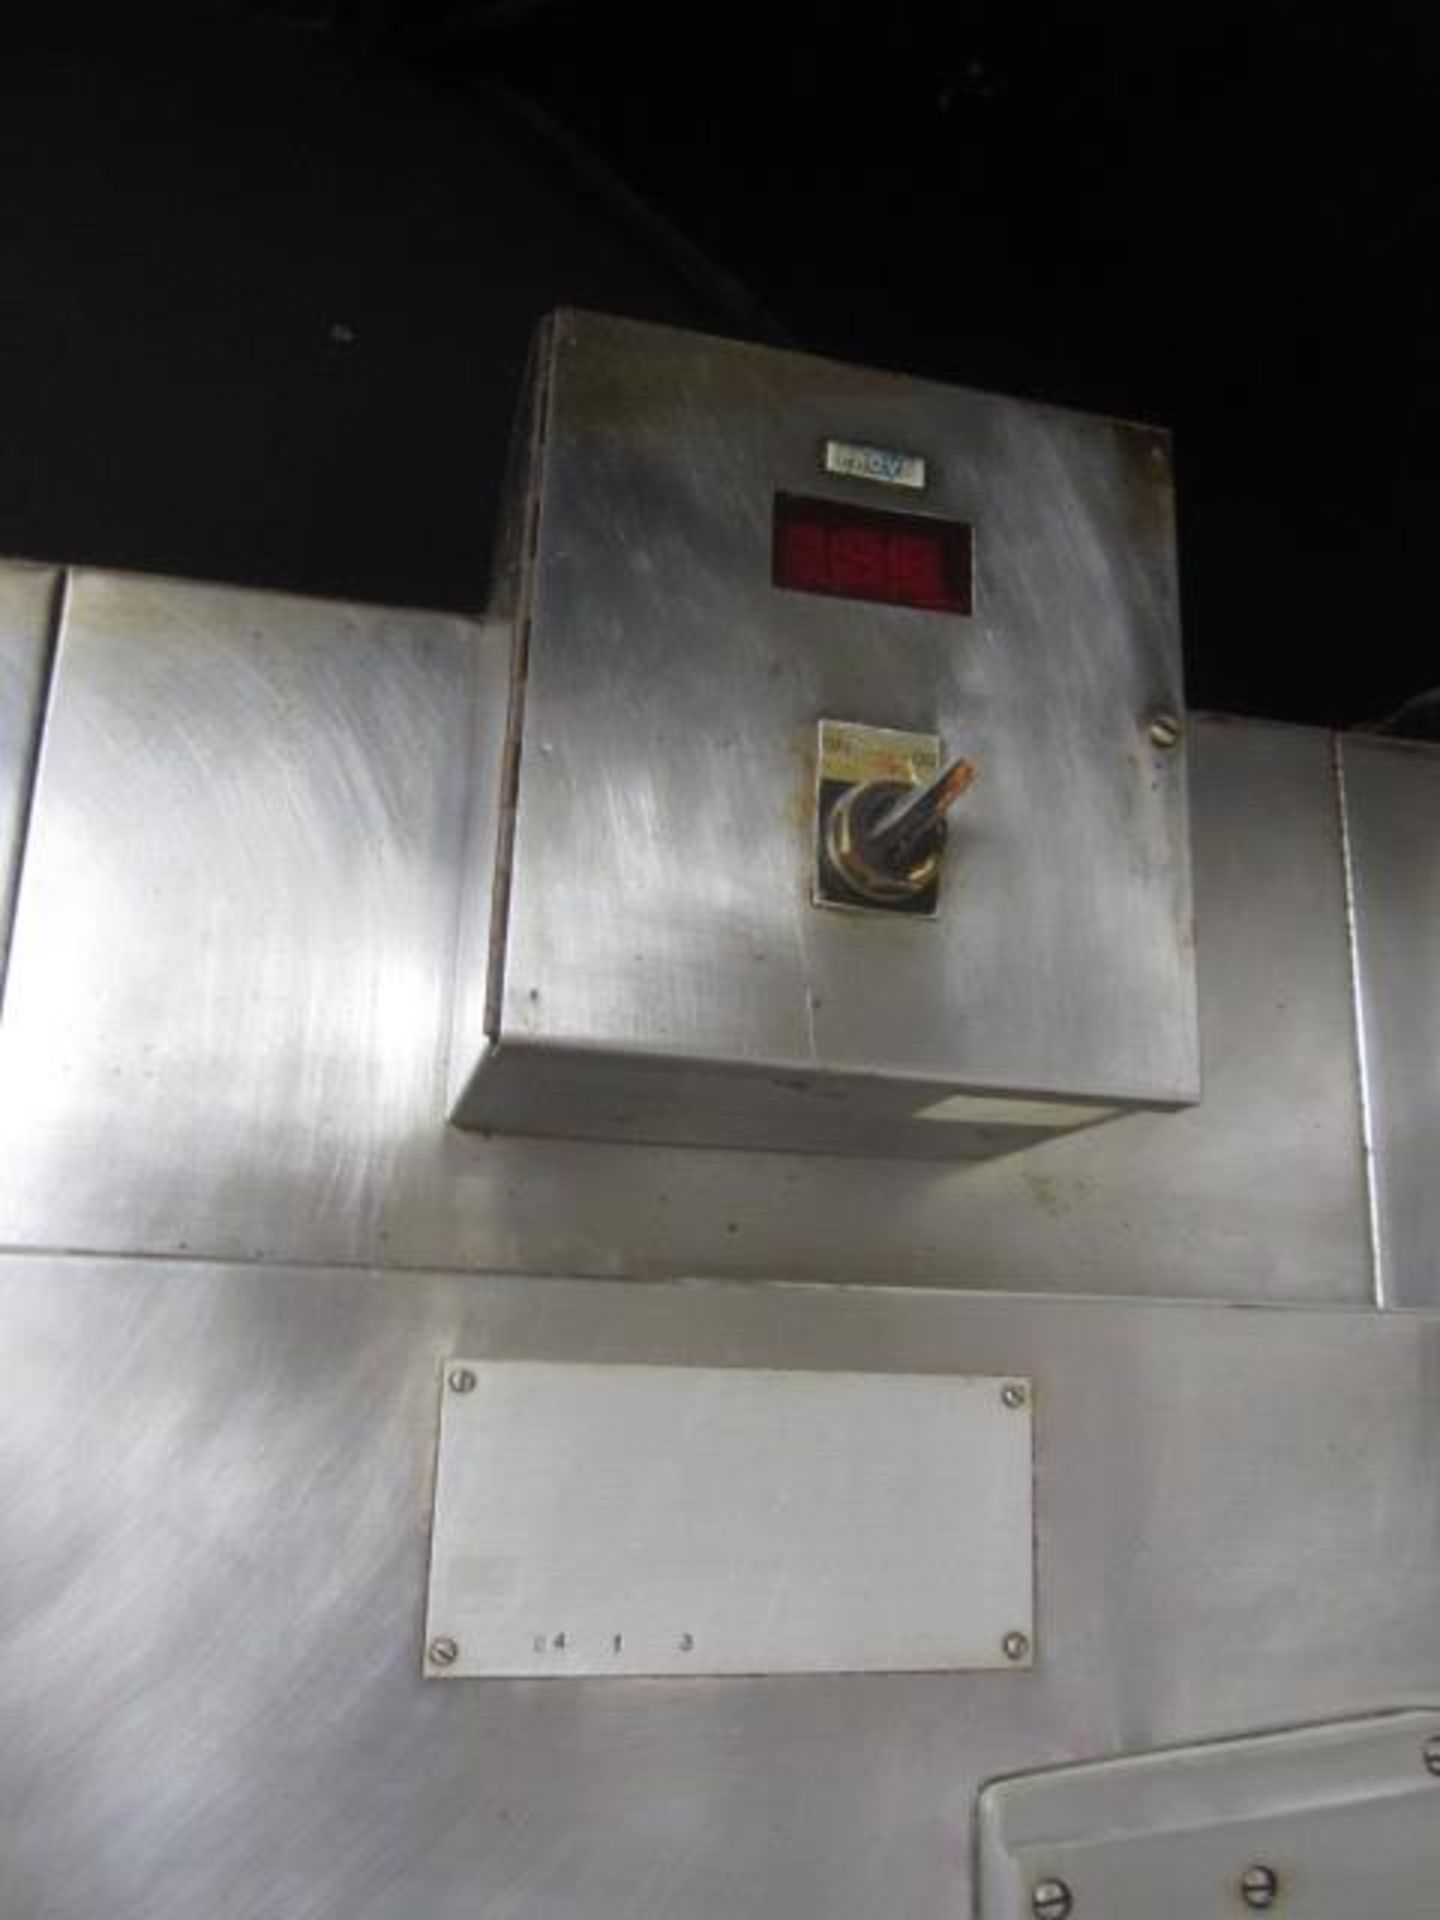 Stainless steel upright commercial prover cabinet, approx. size: 750mm x 21010mm x 1000mm - Out of - Image 2 of 2